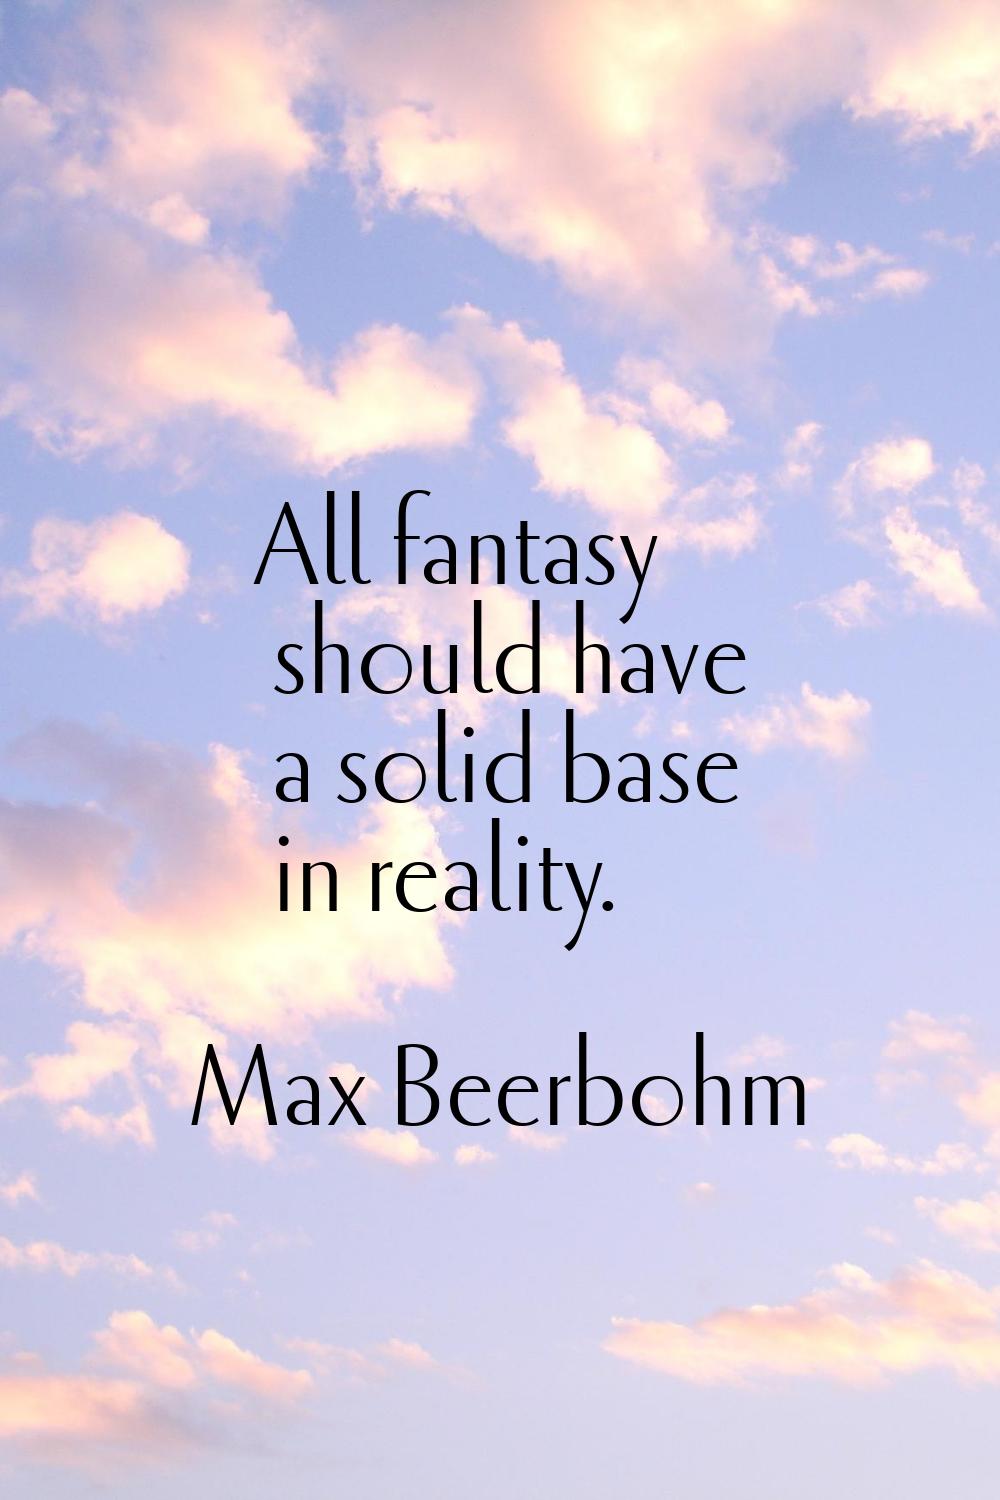 All fantasy should have a solid base in reality.